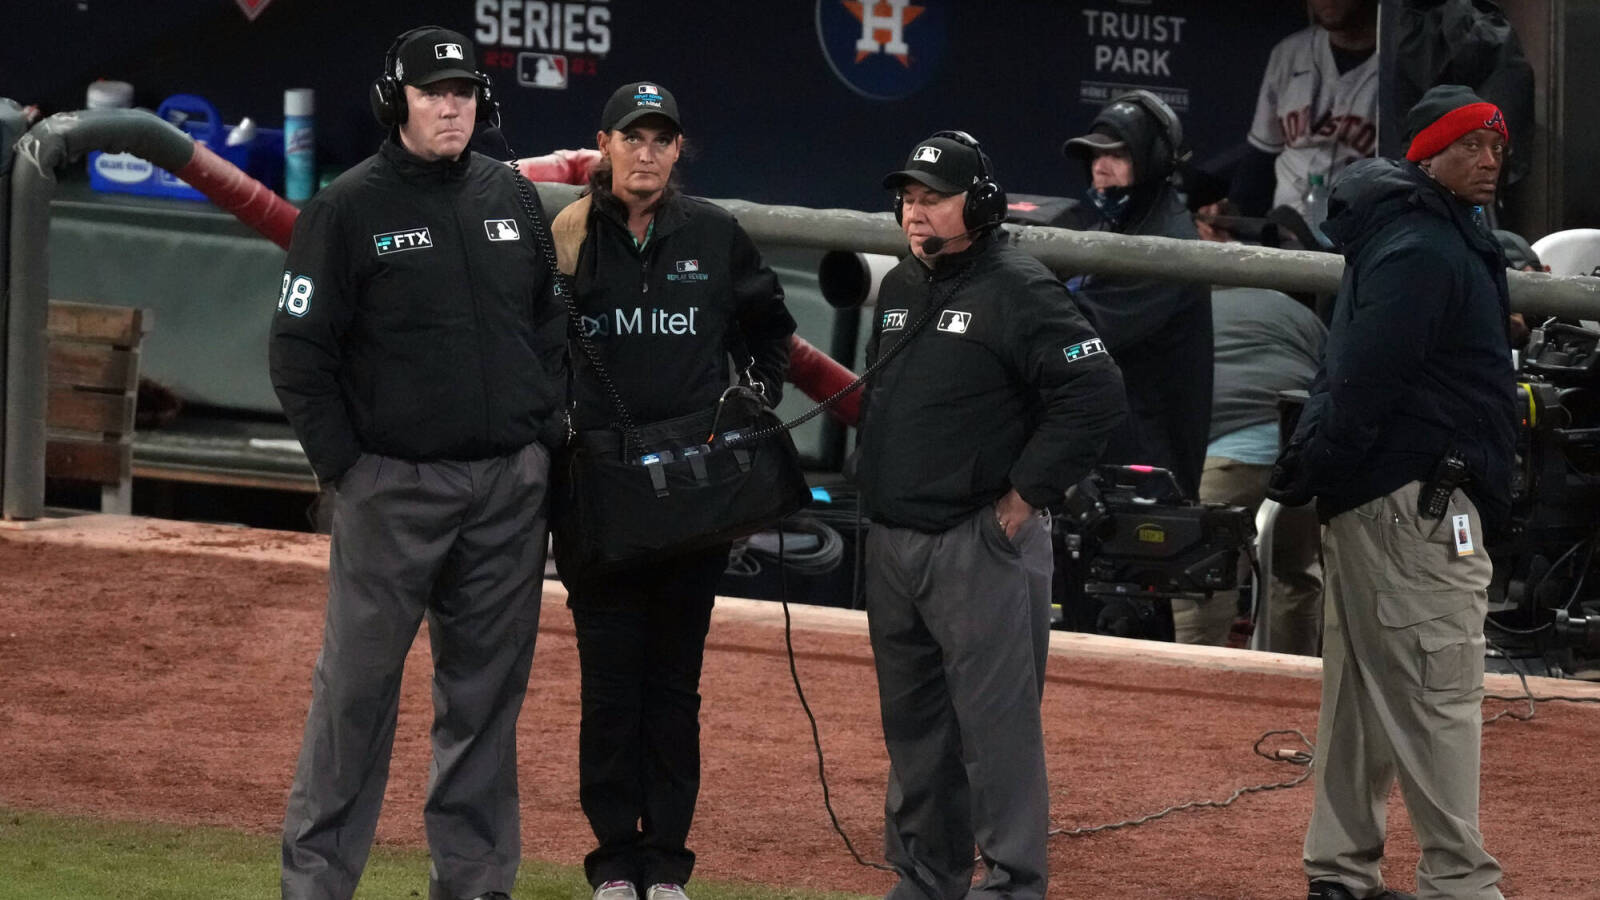 MLB umpires to announce replay reviews to fans | Yardbarker